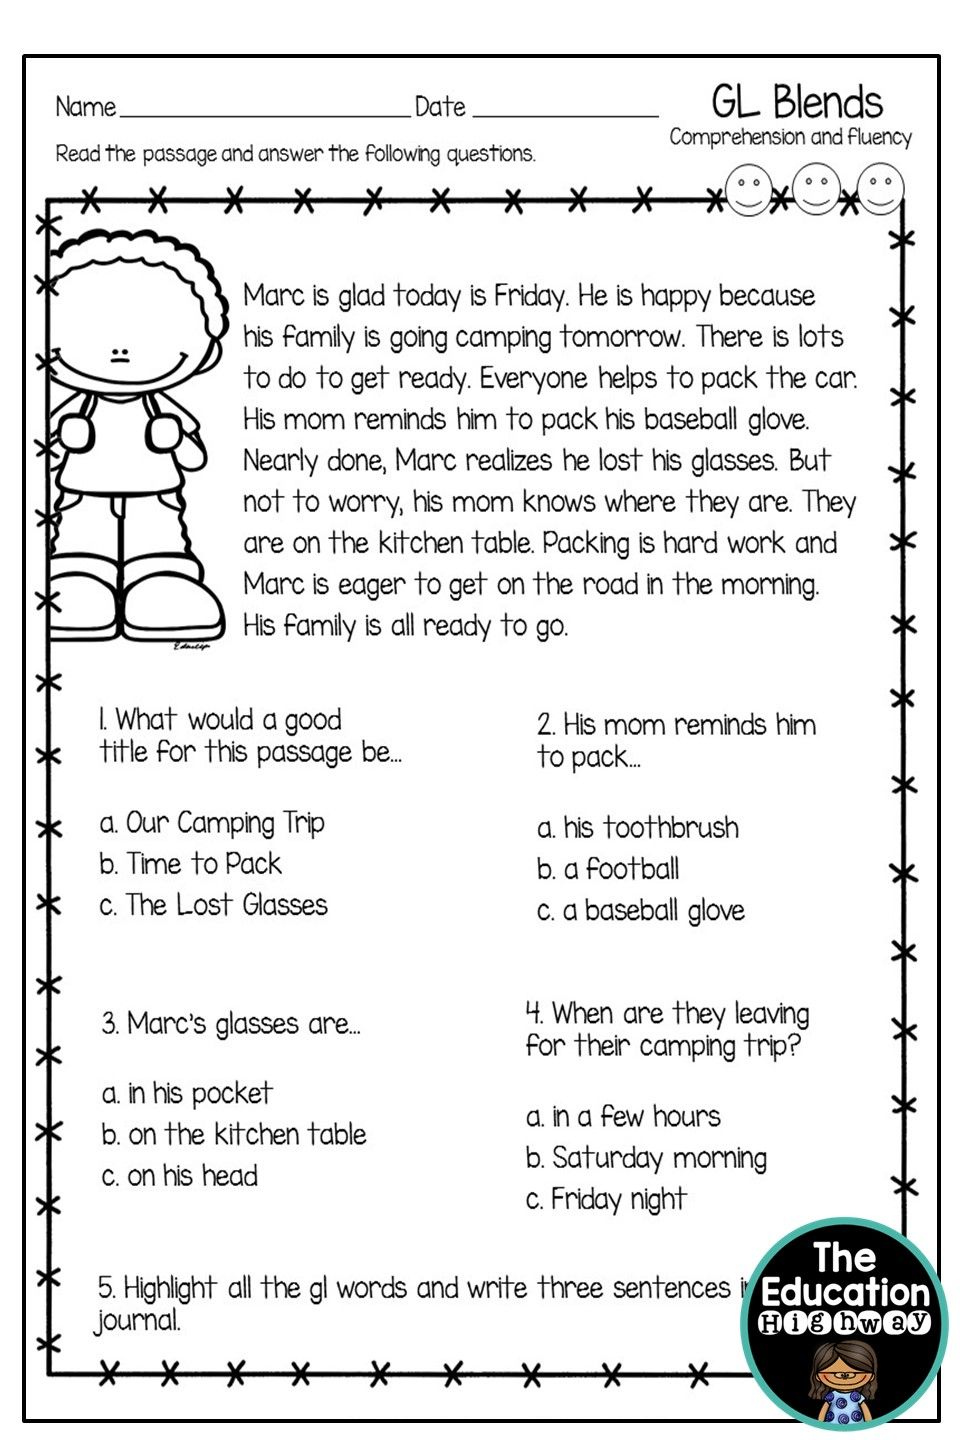 Spanish Reading Comprehension Passages 2nd Grade Dorothy Jame s 